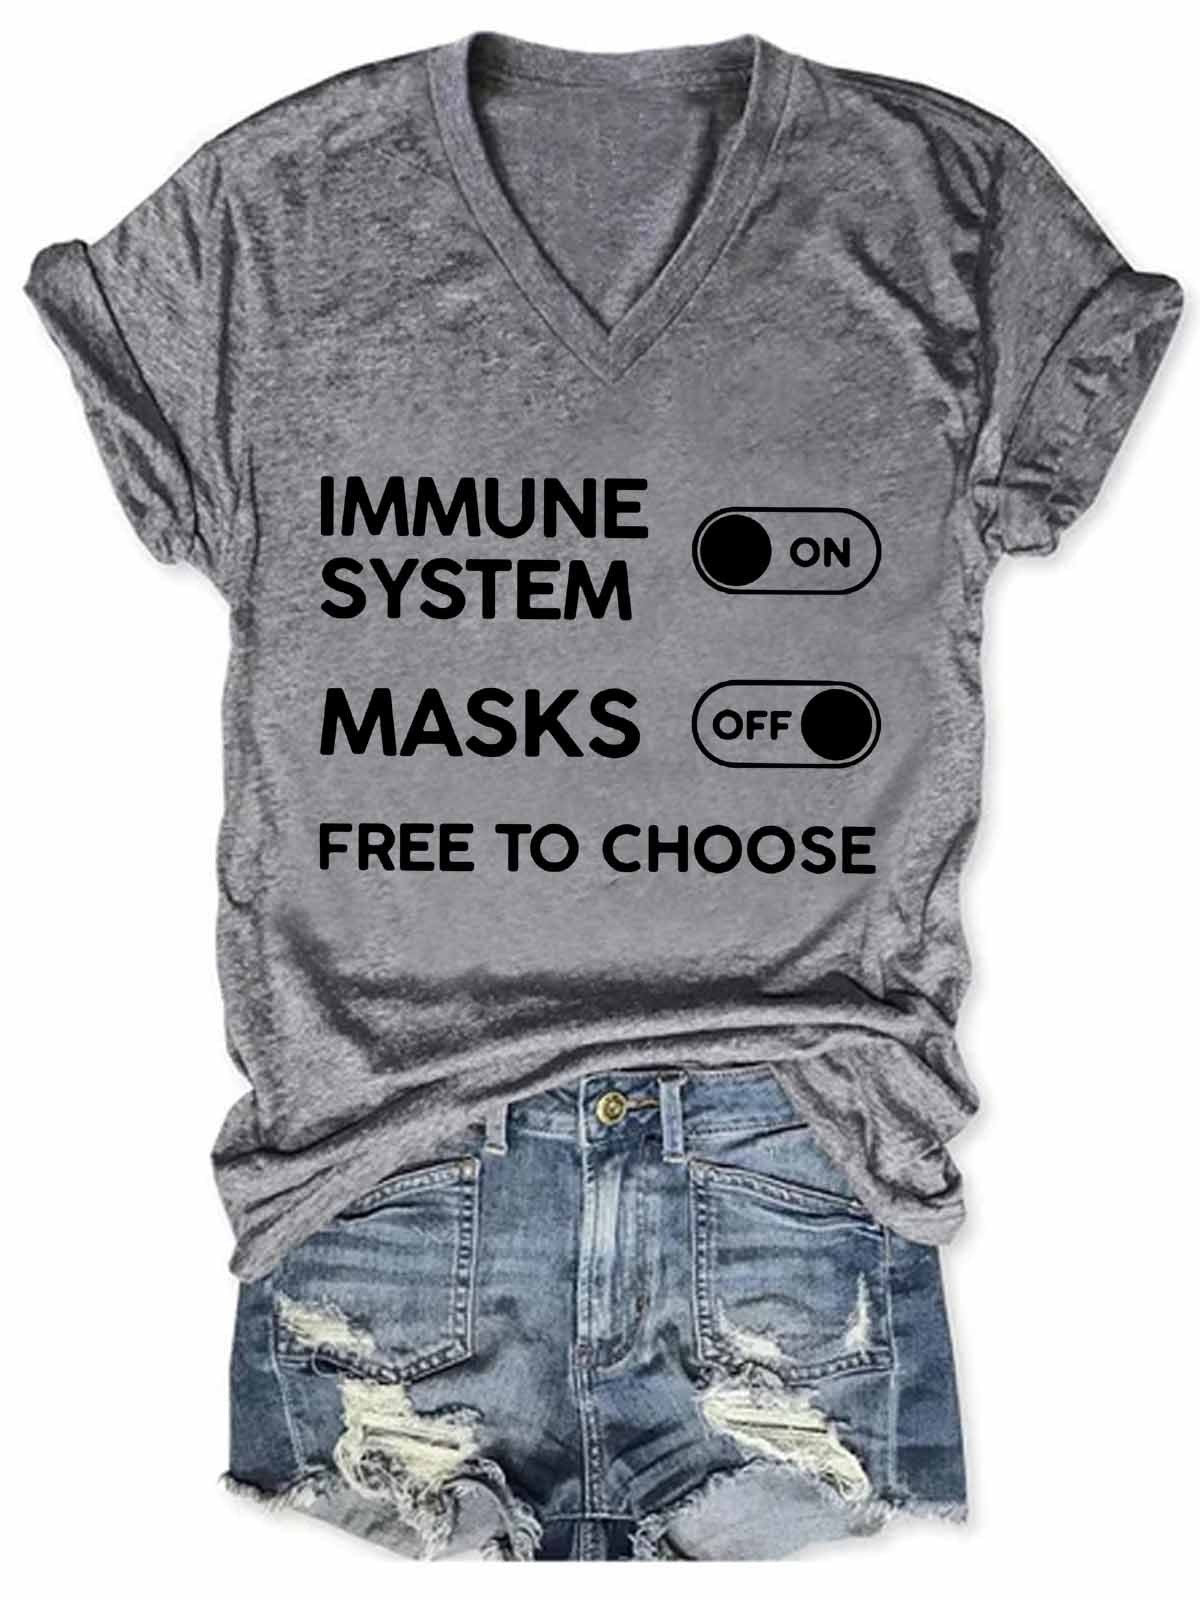 Women's Funny Immune System On Masks Off Free To Choose V-Neck Tee - Outlets Forever